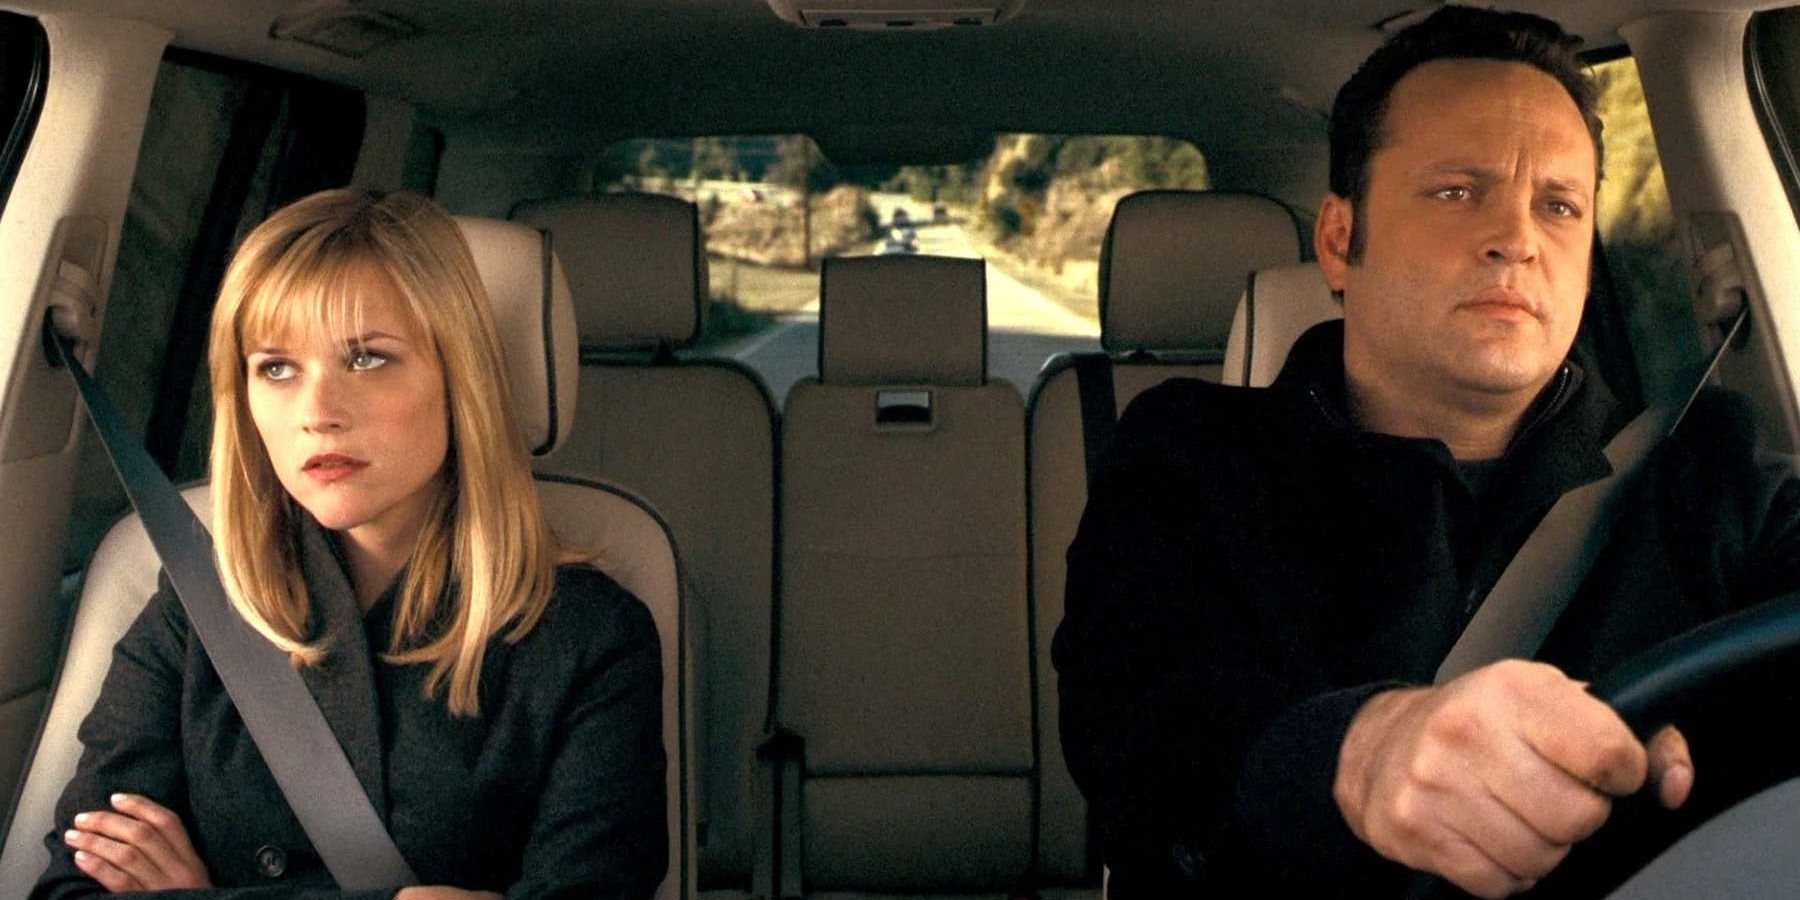 Kate and brad drive to their family's houses for Christmas Day in Four Christmases